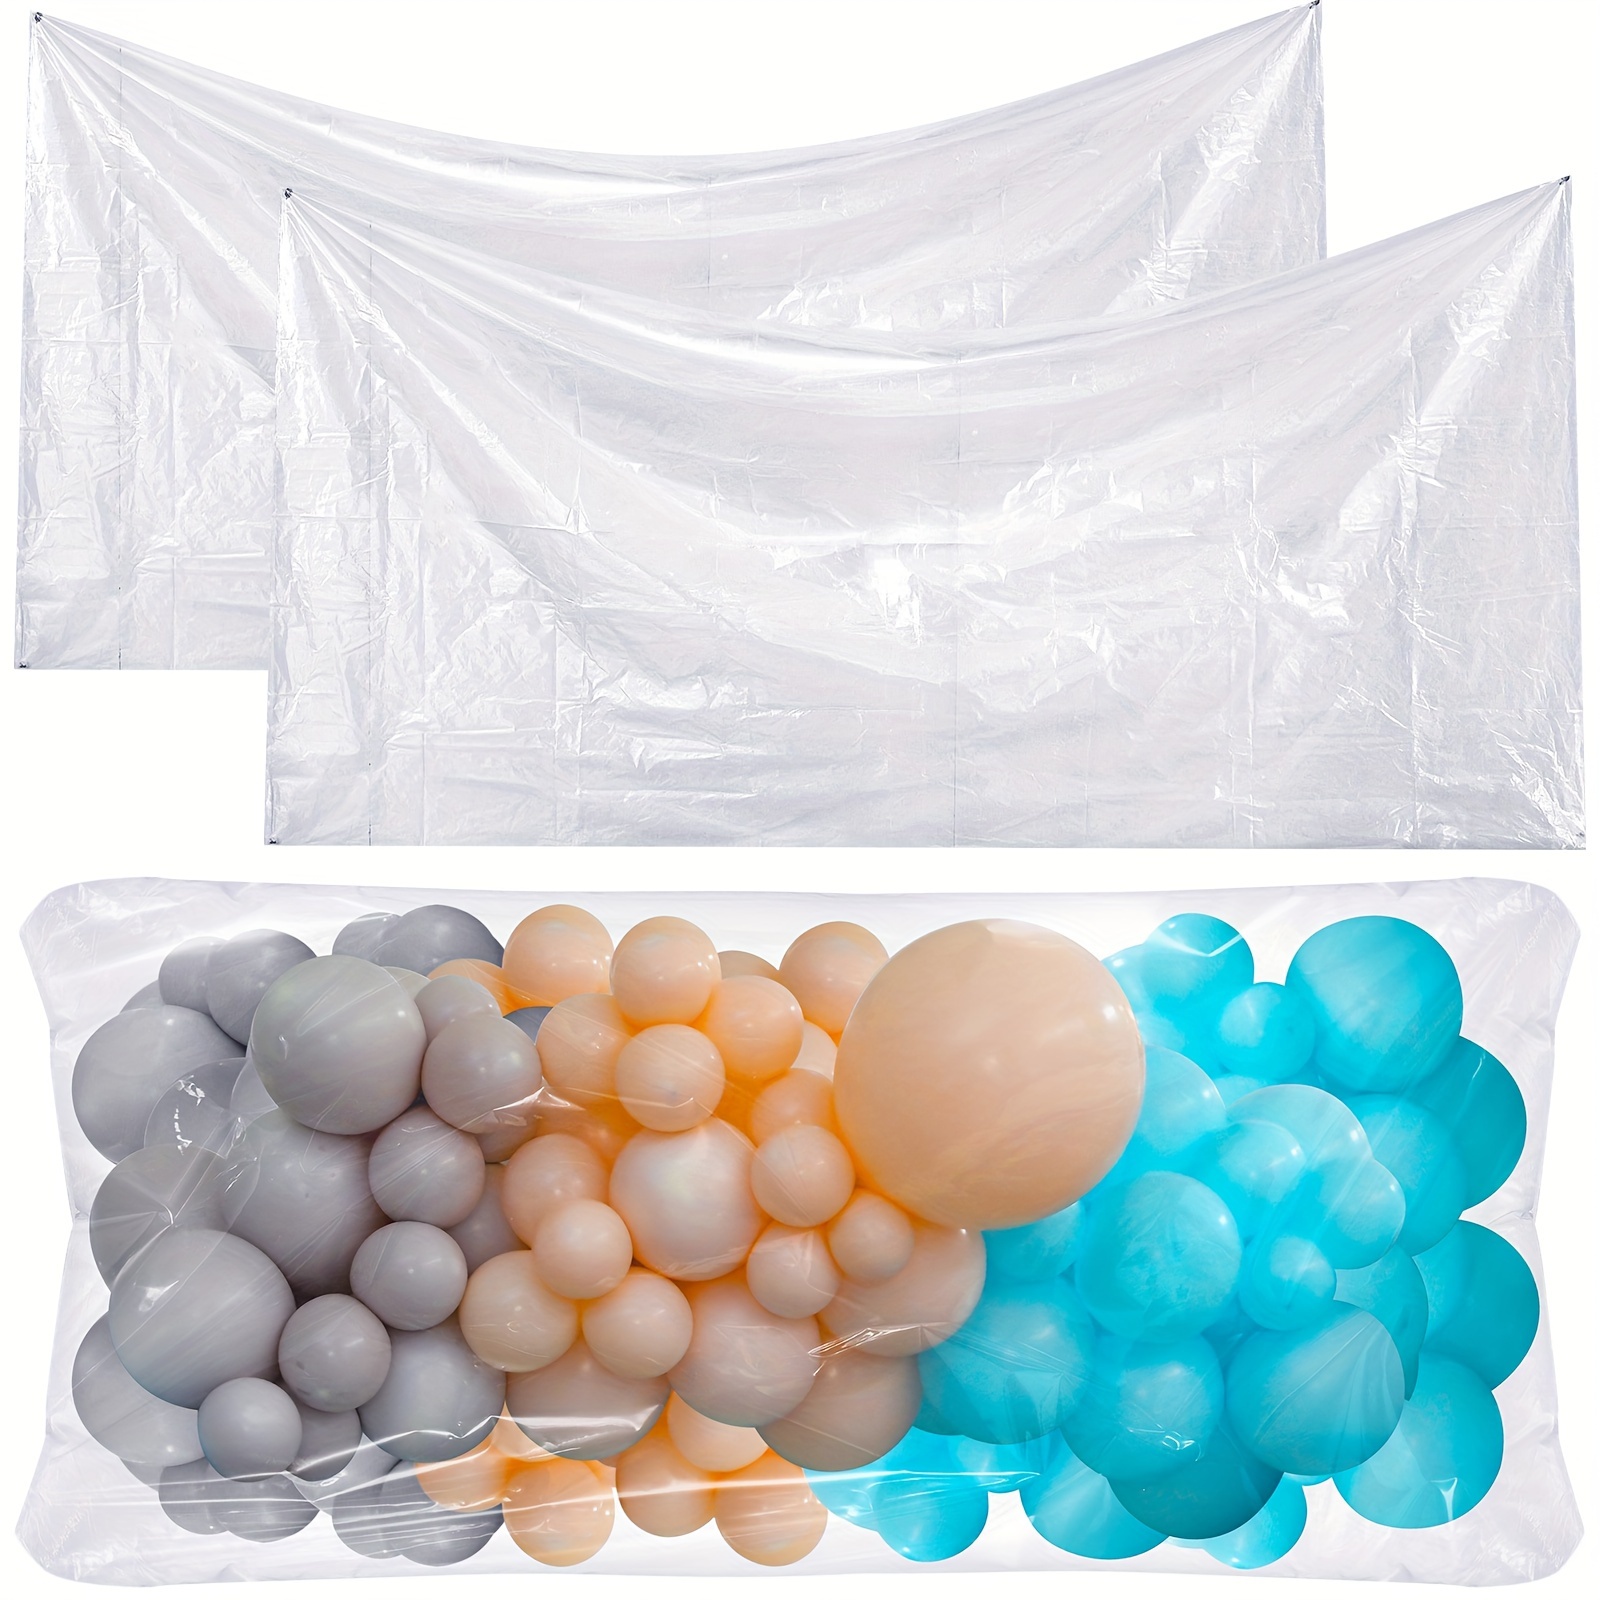  Large Balloon Bags for Transport, Balloon Transport Bags, 2 Pcs  98 X 59 Inches Thick Plastic Balloon Drop Bags Clear Giant Balloon Storage  Bags for Birthday, Party Baby Shower, Party Supplies 